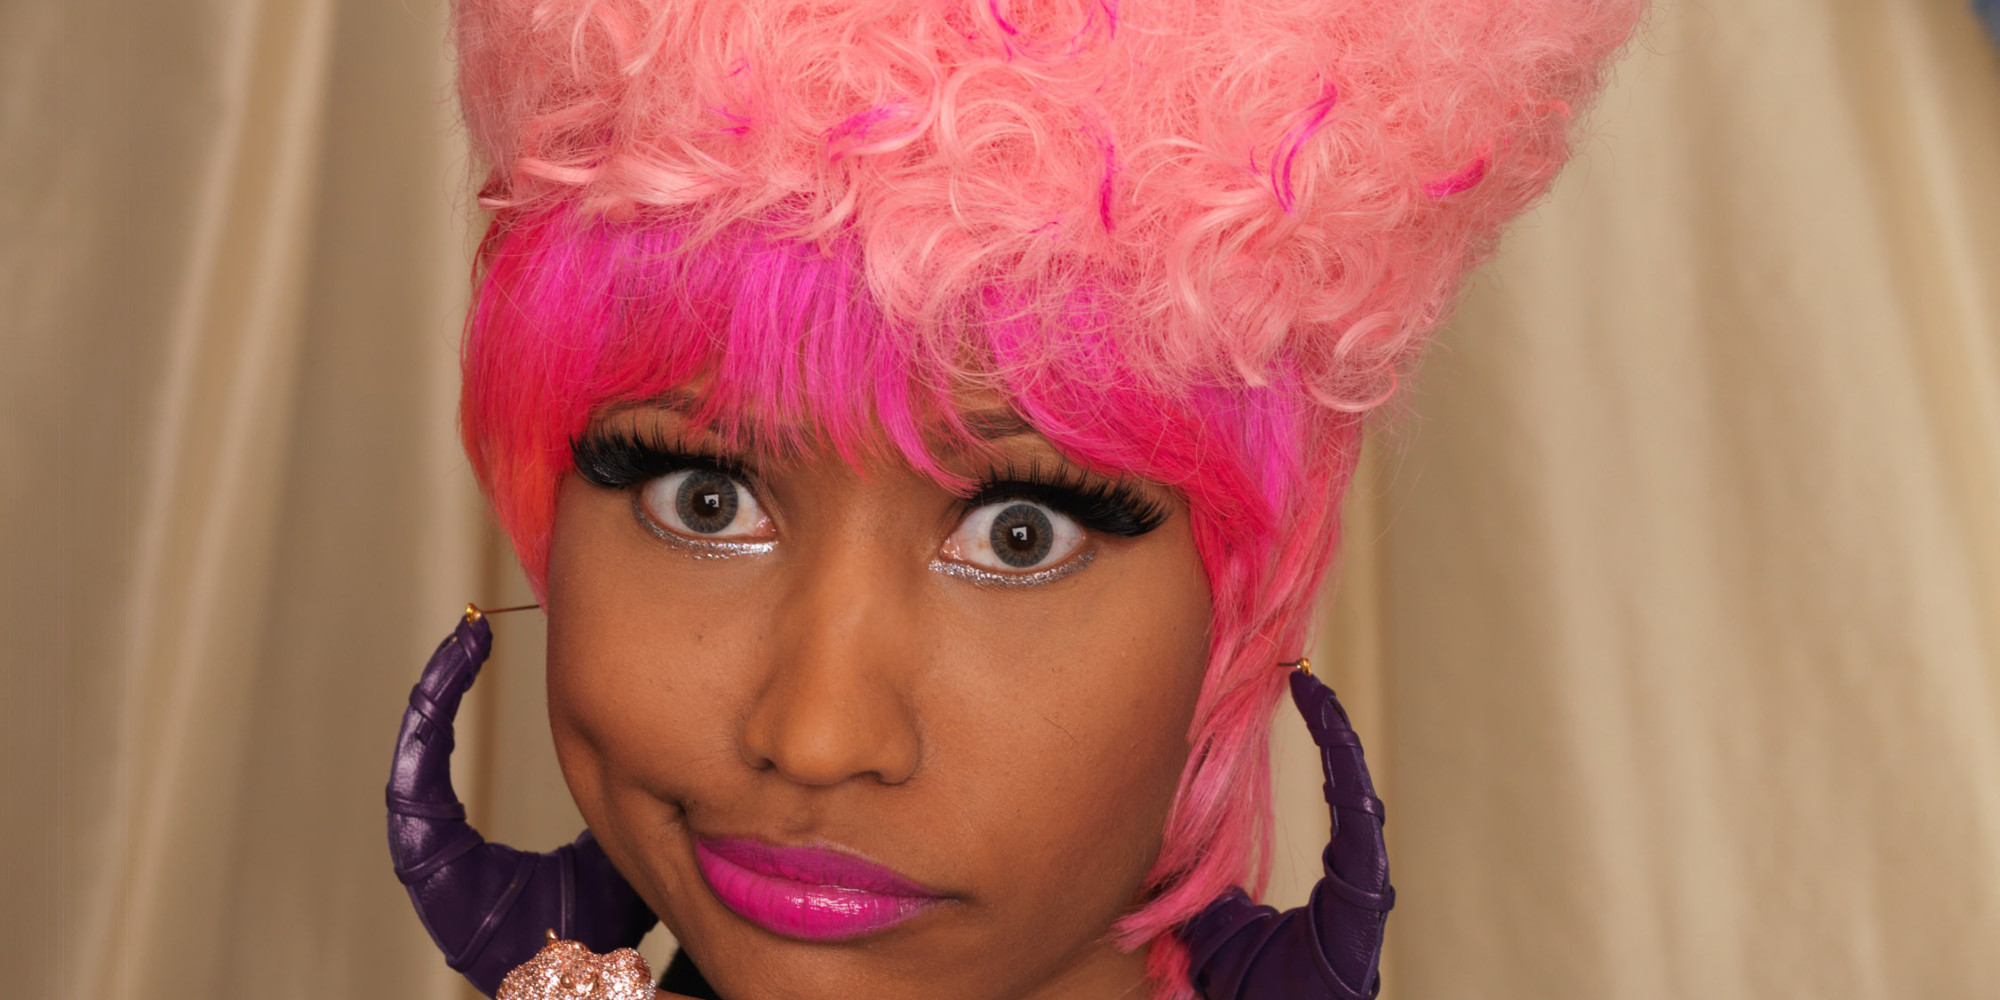 The Real Reason Nicki Minaj Has Gone For A More 'Natural' Look | HuffPost